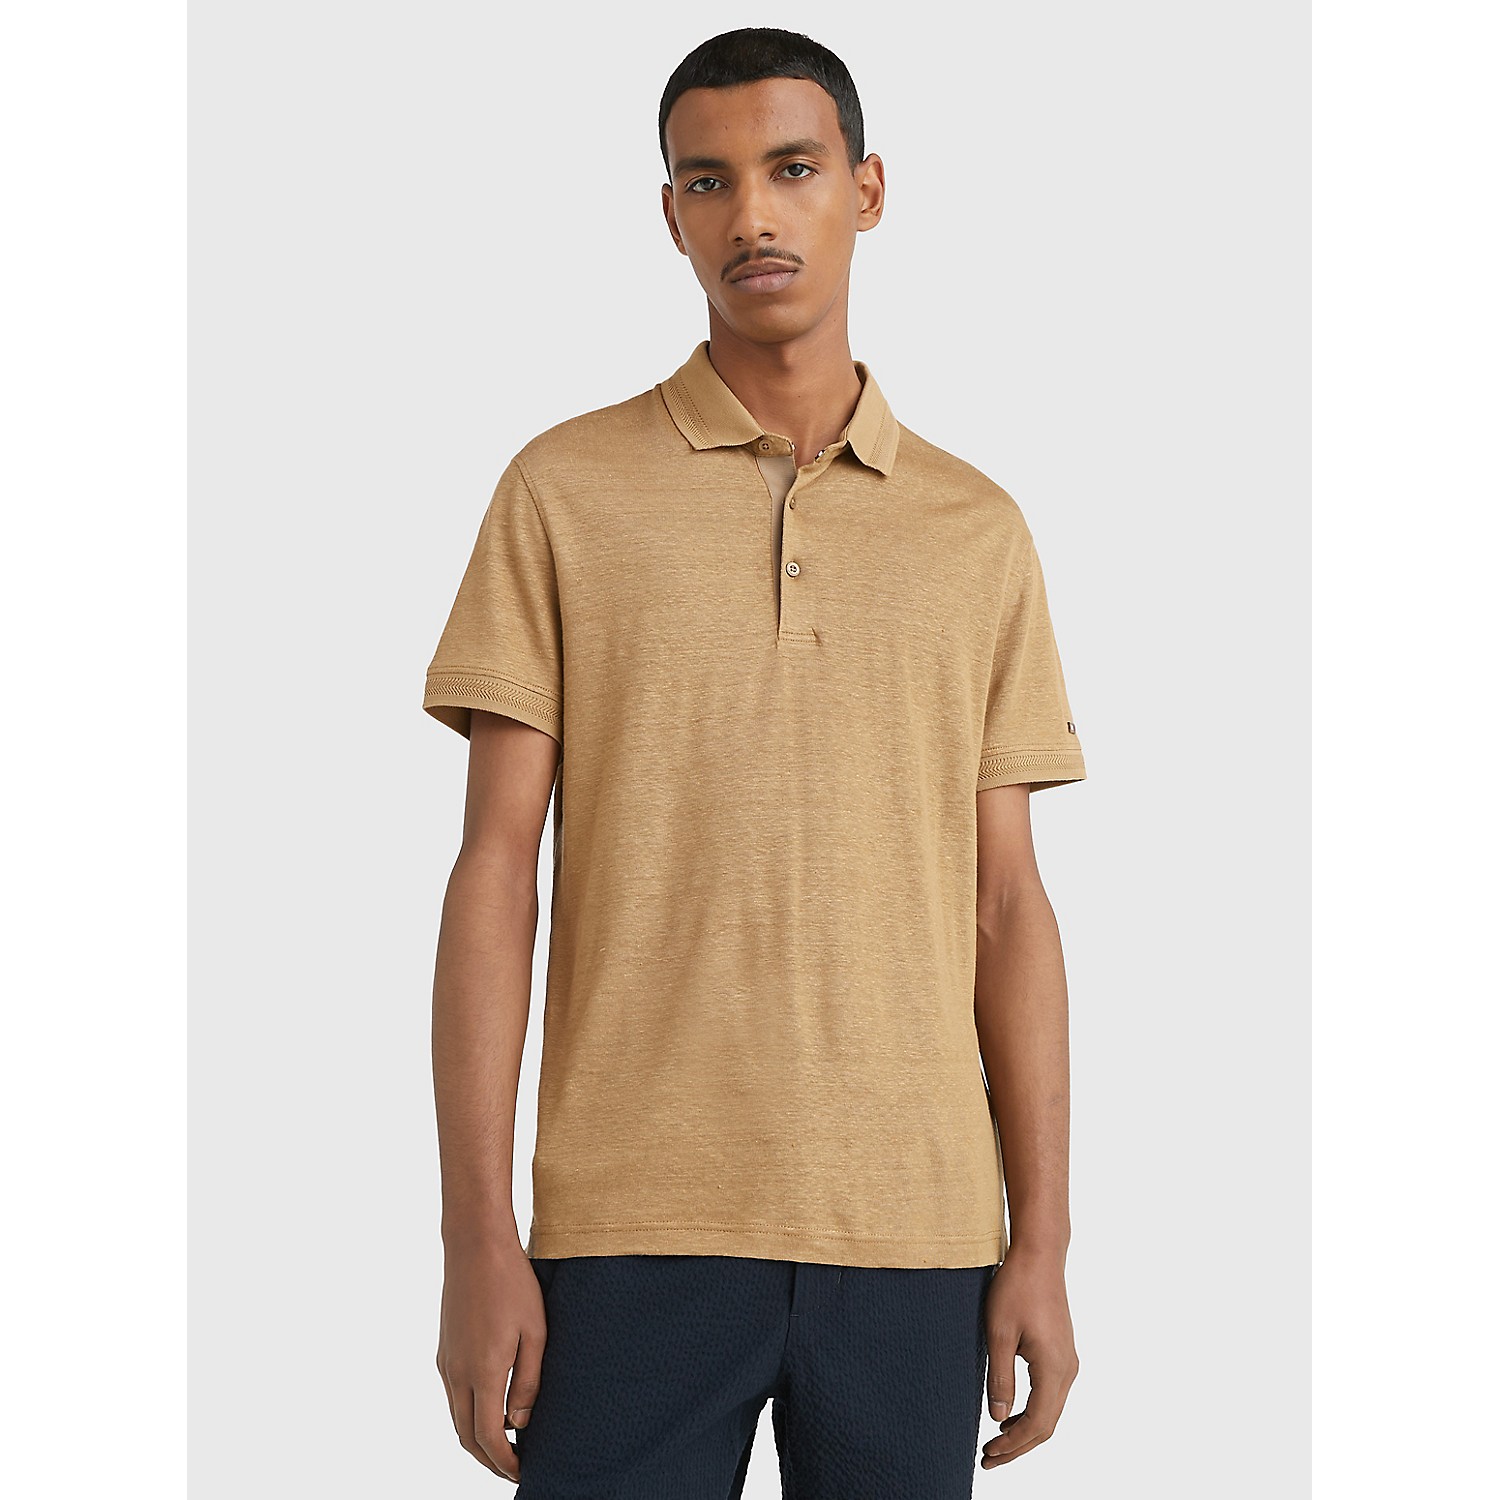 TOMMY HILFIGER Slim Fit Solid Linen Polo